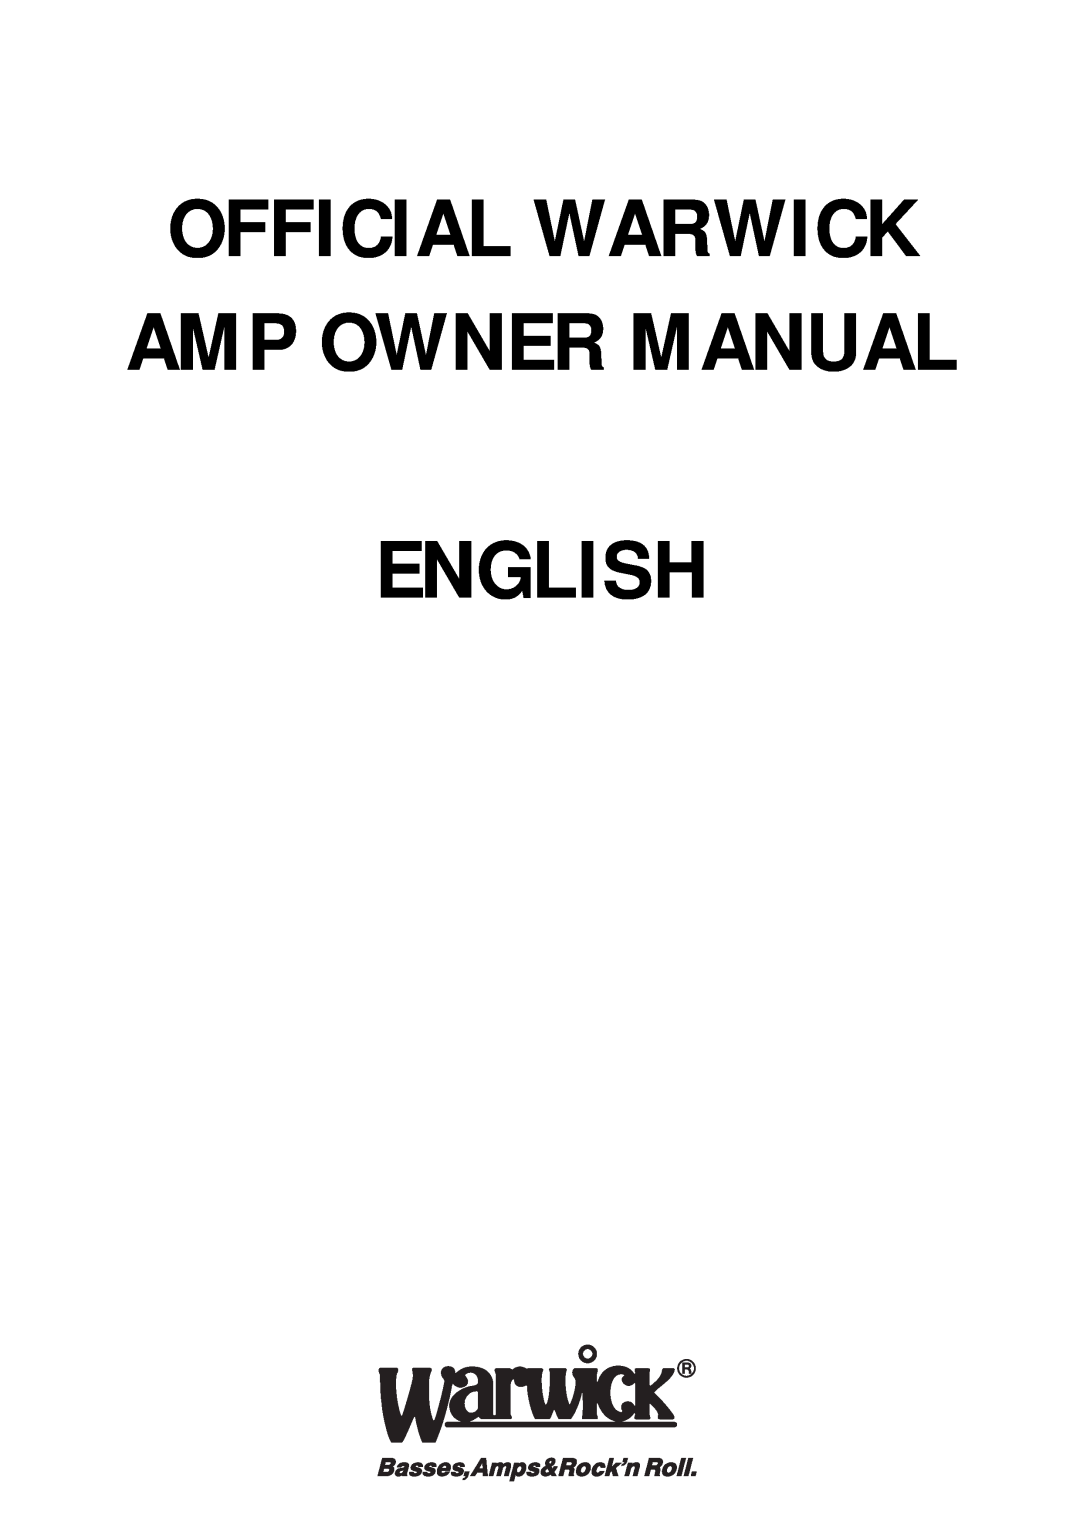 Warwick AMPs owner manual Official Warwick, English 